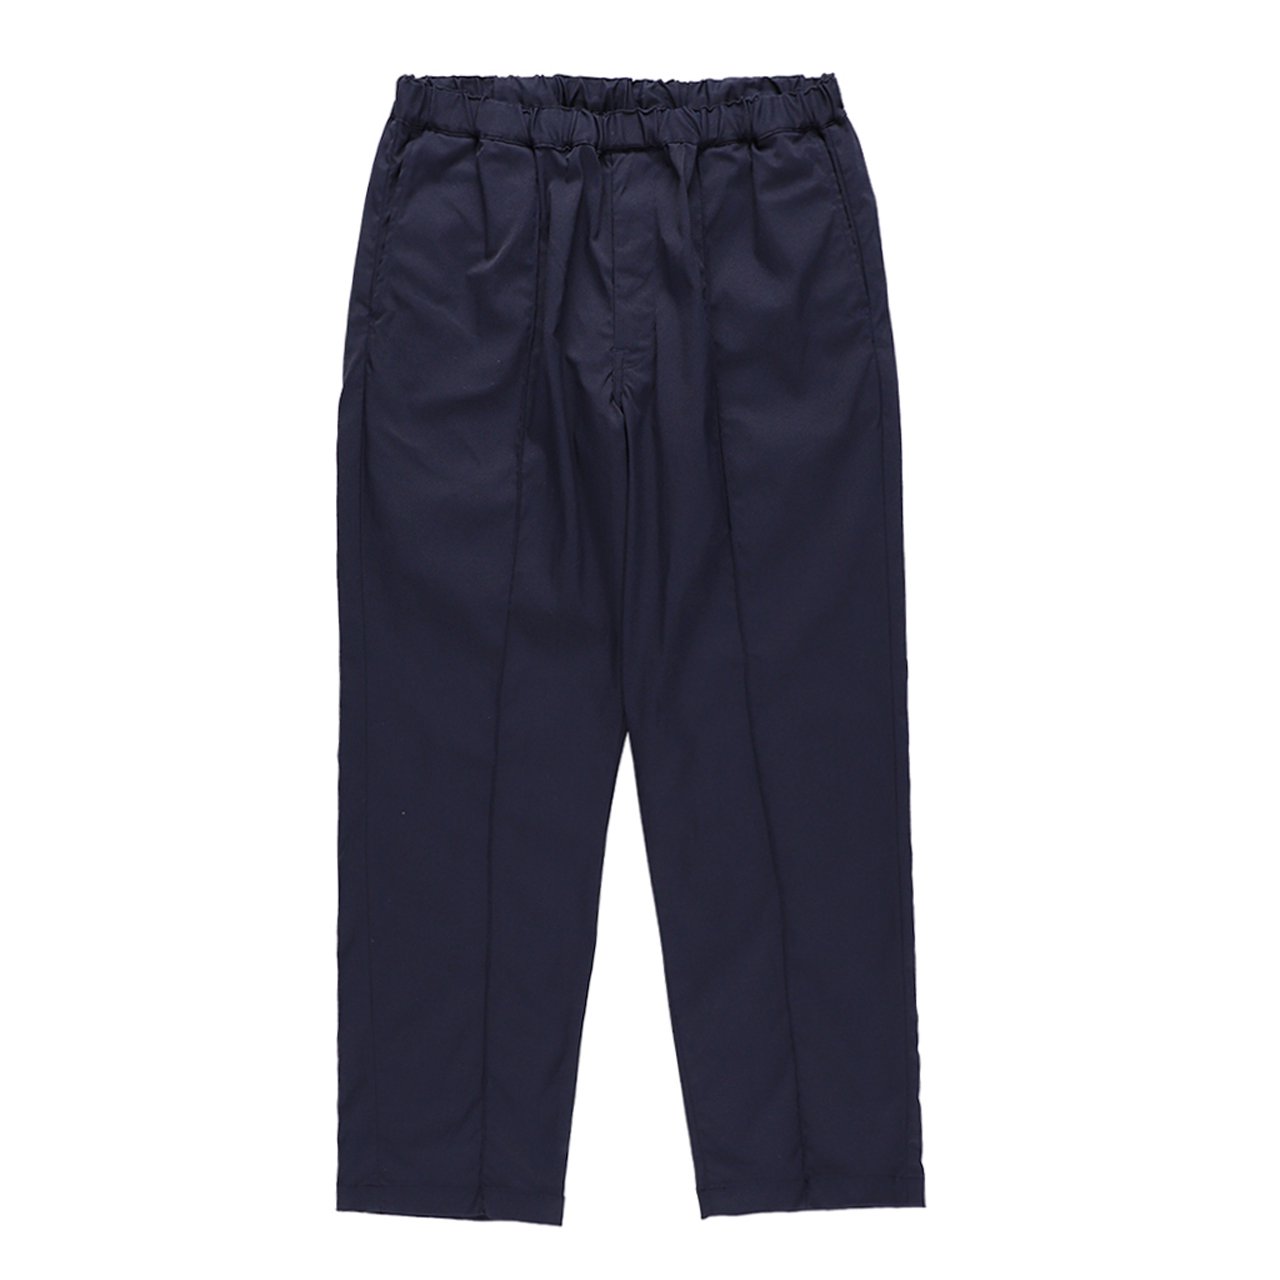 <img class='new_mark_img1' src='https://img.shop-pro.jp/img/new/icons5.gif' style='border:none;display:inline;margin:0px;padding:0px;width:auto;' />STANDARD CALIFORNIA ( ե˥)Easy Work Pants Navy